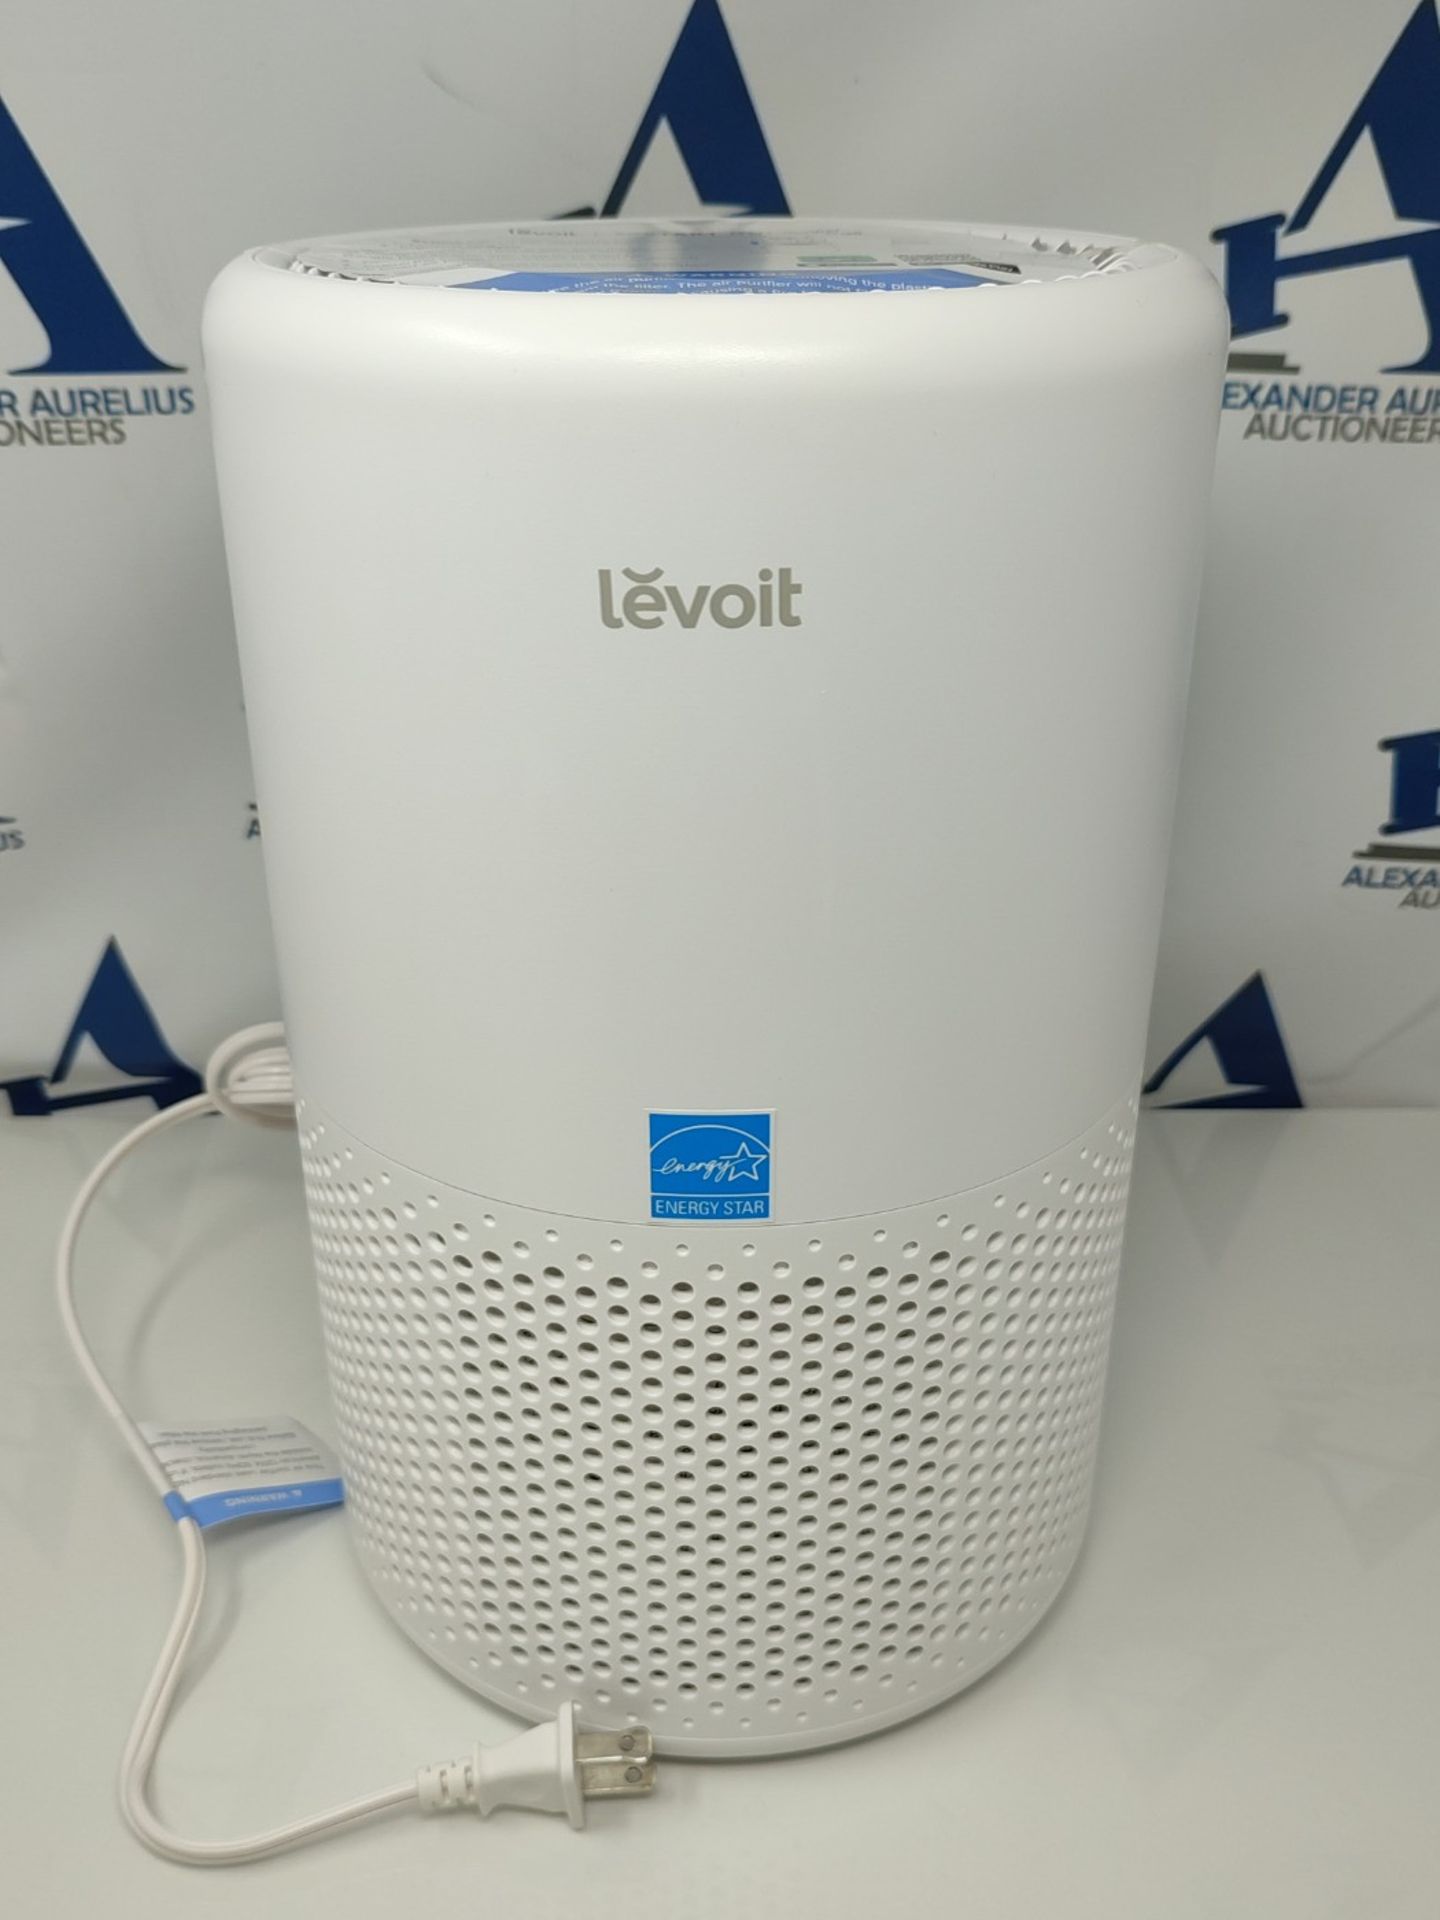 RRP £89.00 LEVOIT Smart WiFi Air Purifier for Home, Alexa Enabled H13 HEPA Filter, CADR 170m³/h, - Image 2 of 2